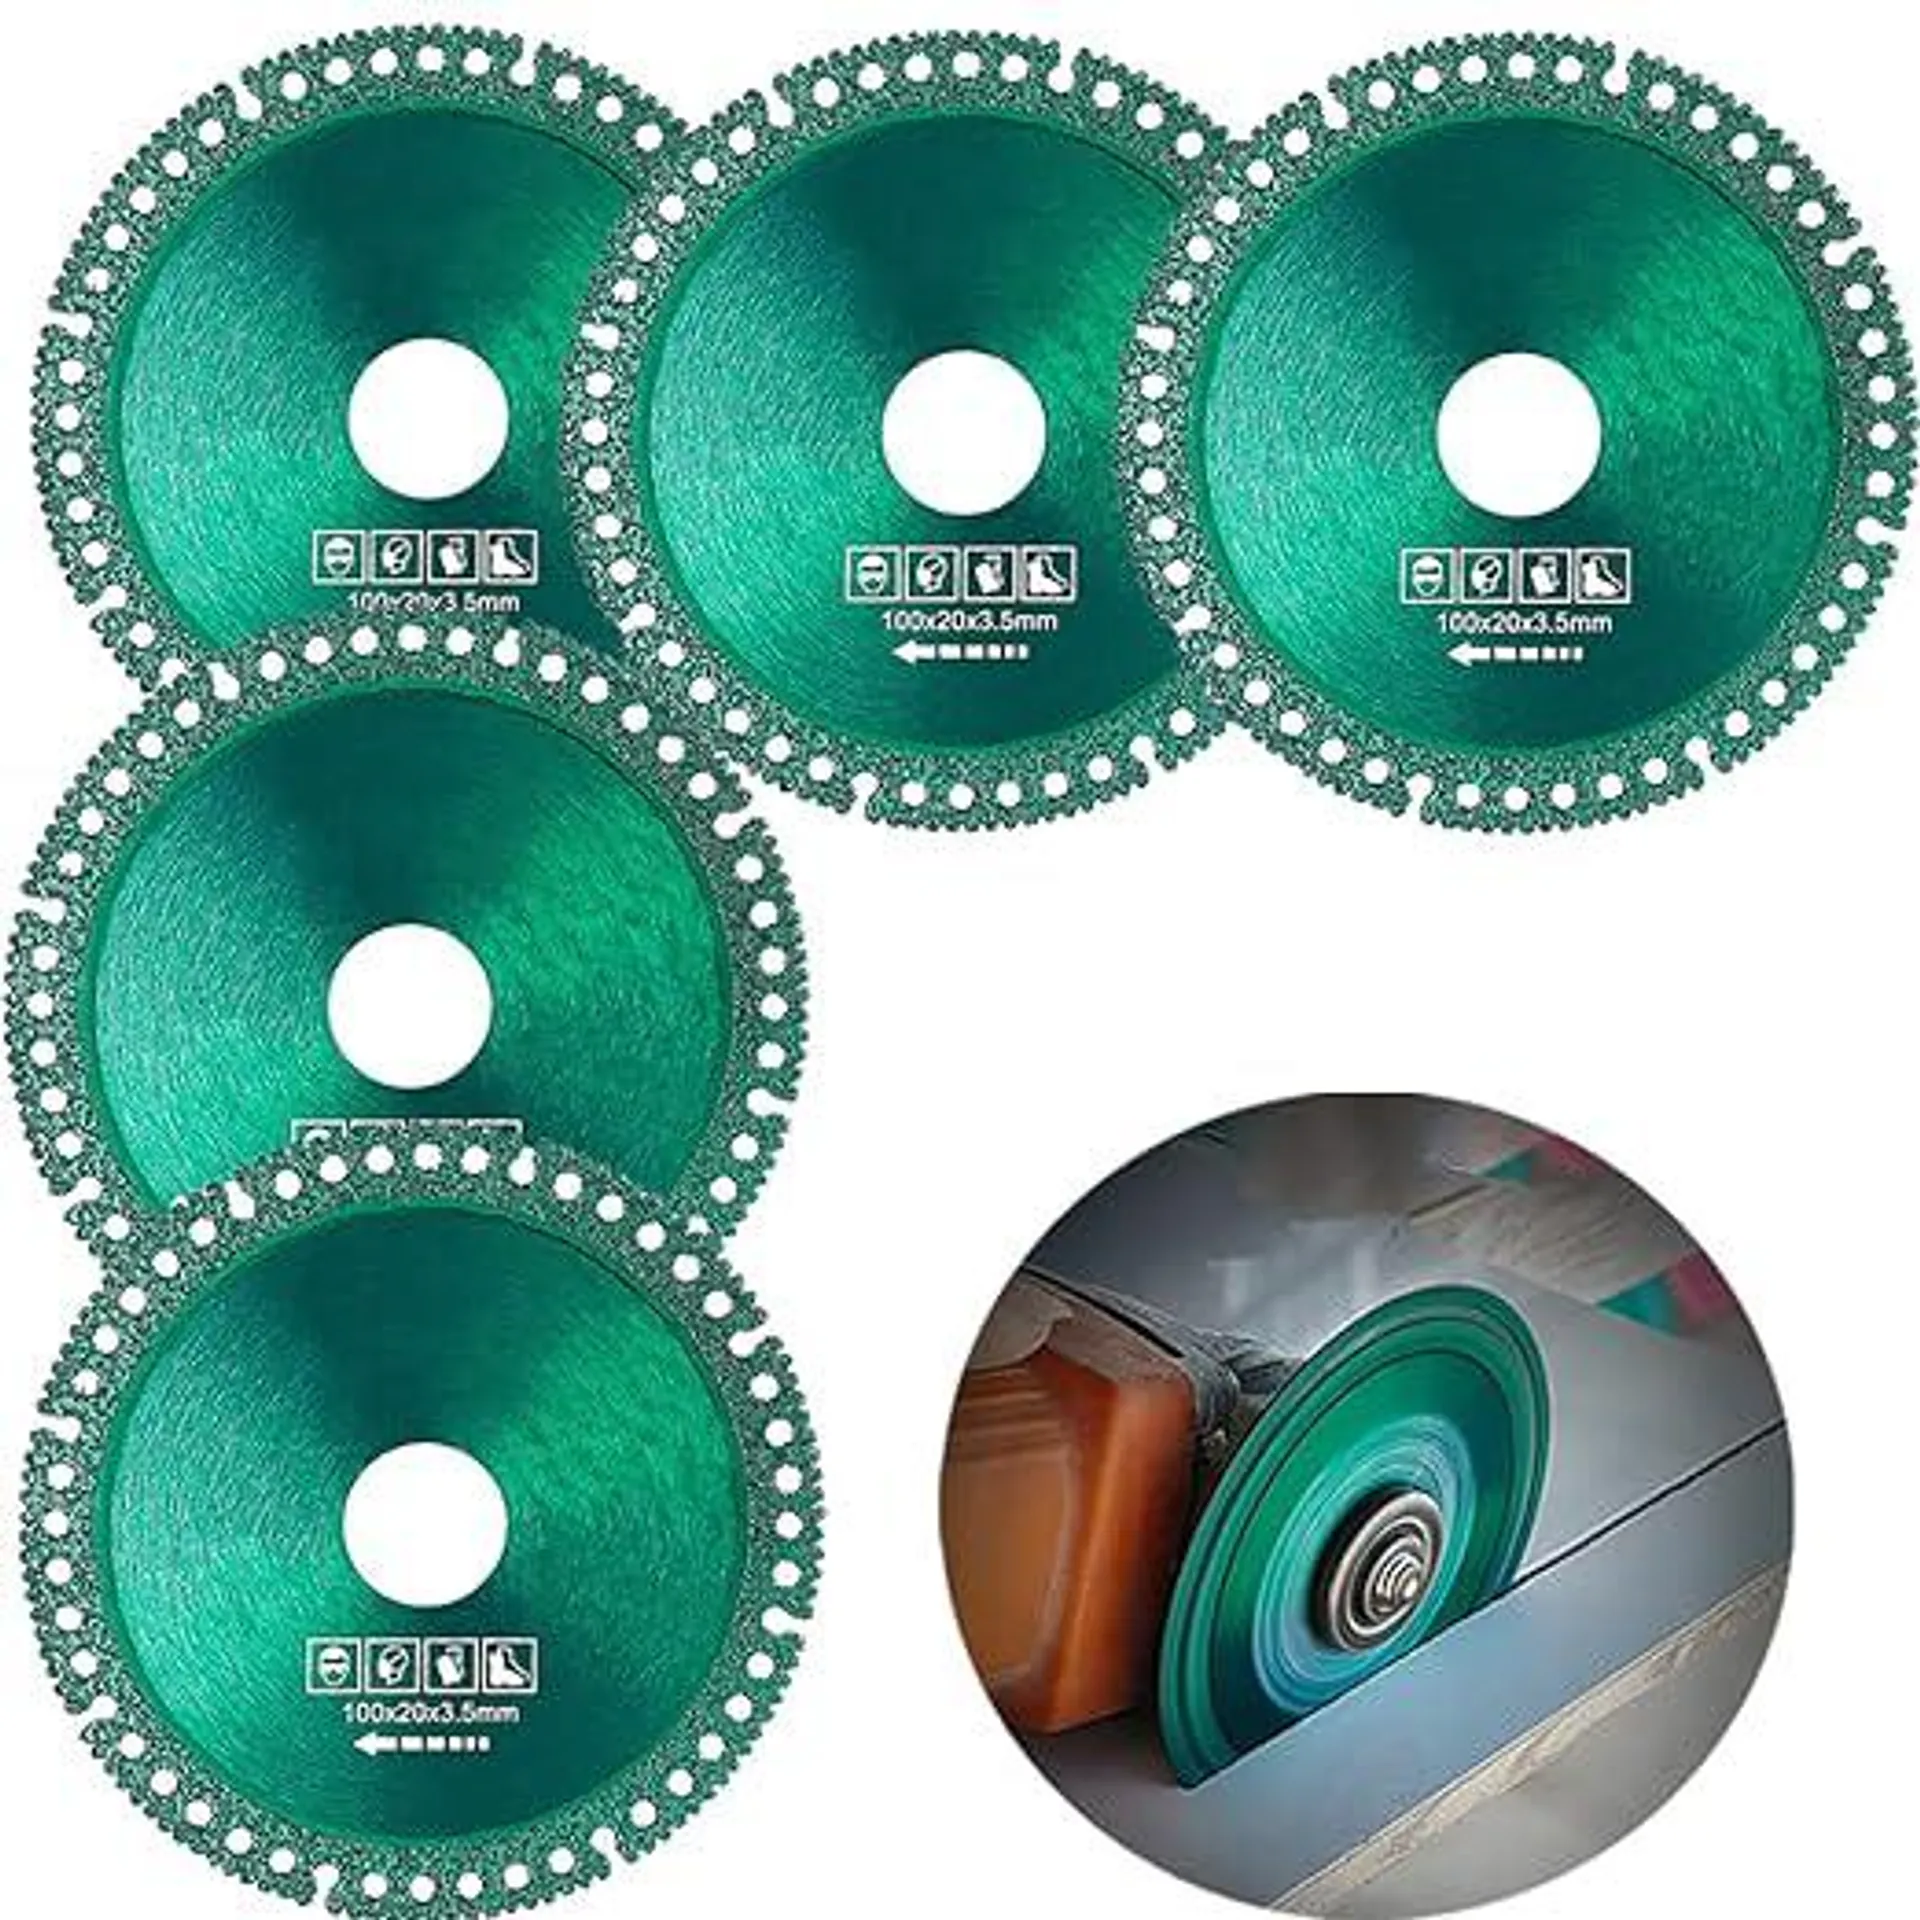 5Pcs Indestructible Discs for Grinder, Indestructible Disc 2.0 - Cut Everything in Seconds, Composite Multifunctional Cutting Saw Blade 4 Inch Ultra-Thin Saw Blade for Angle Grinder